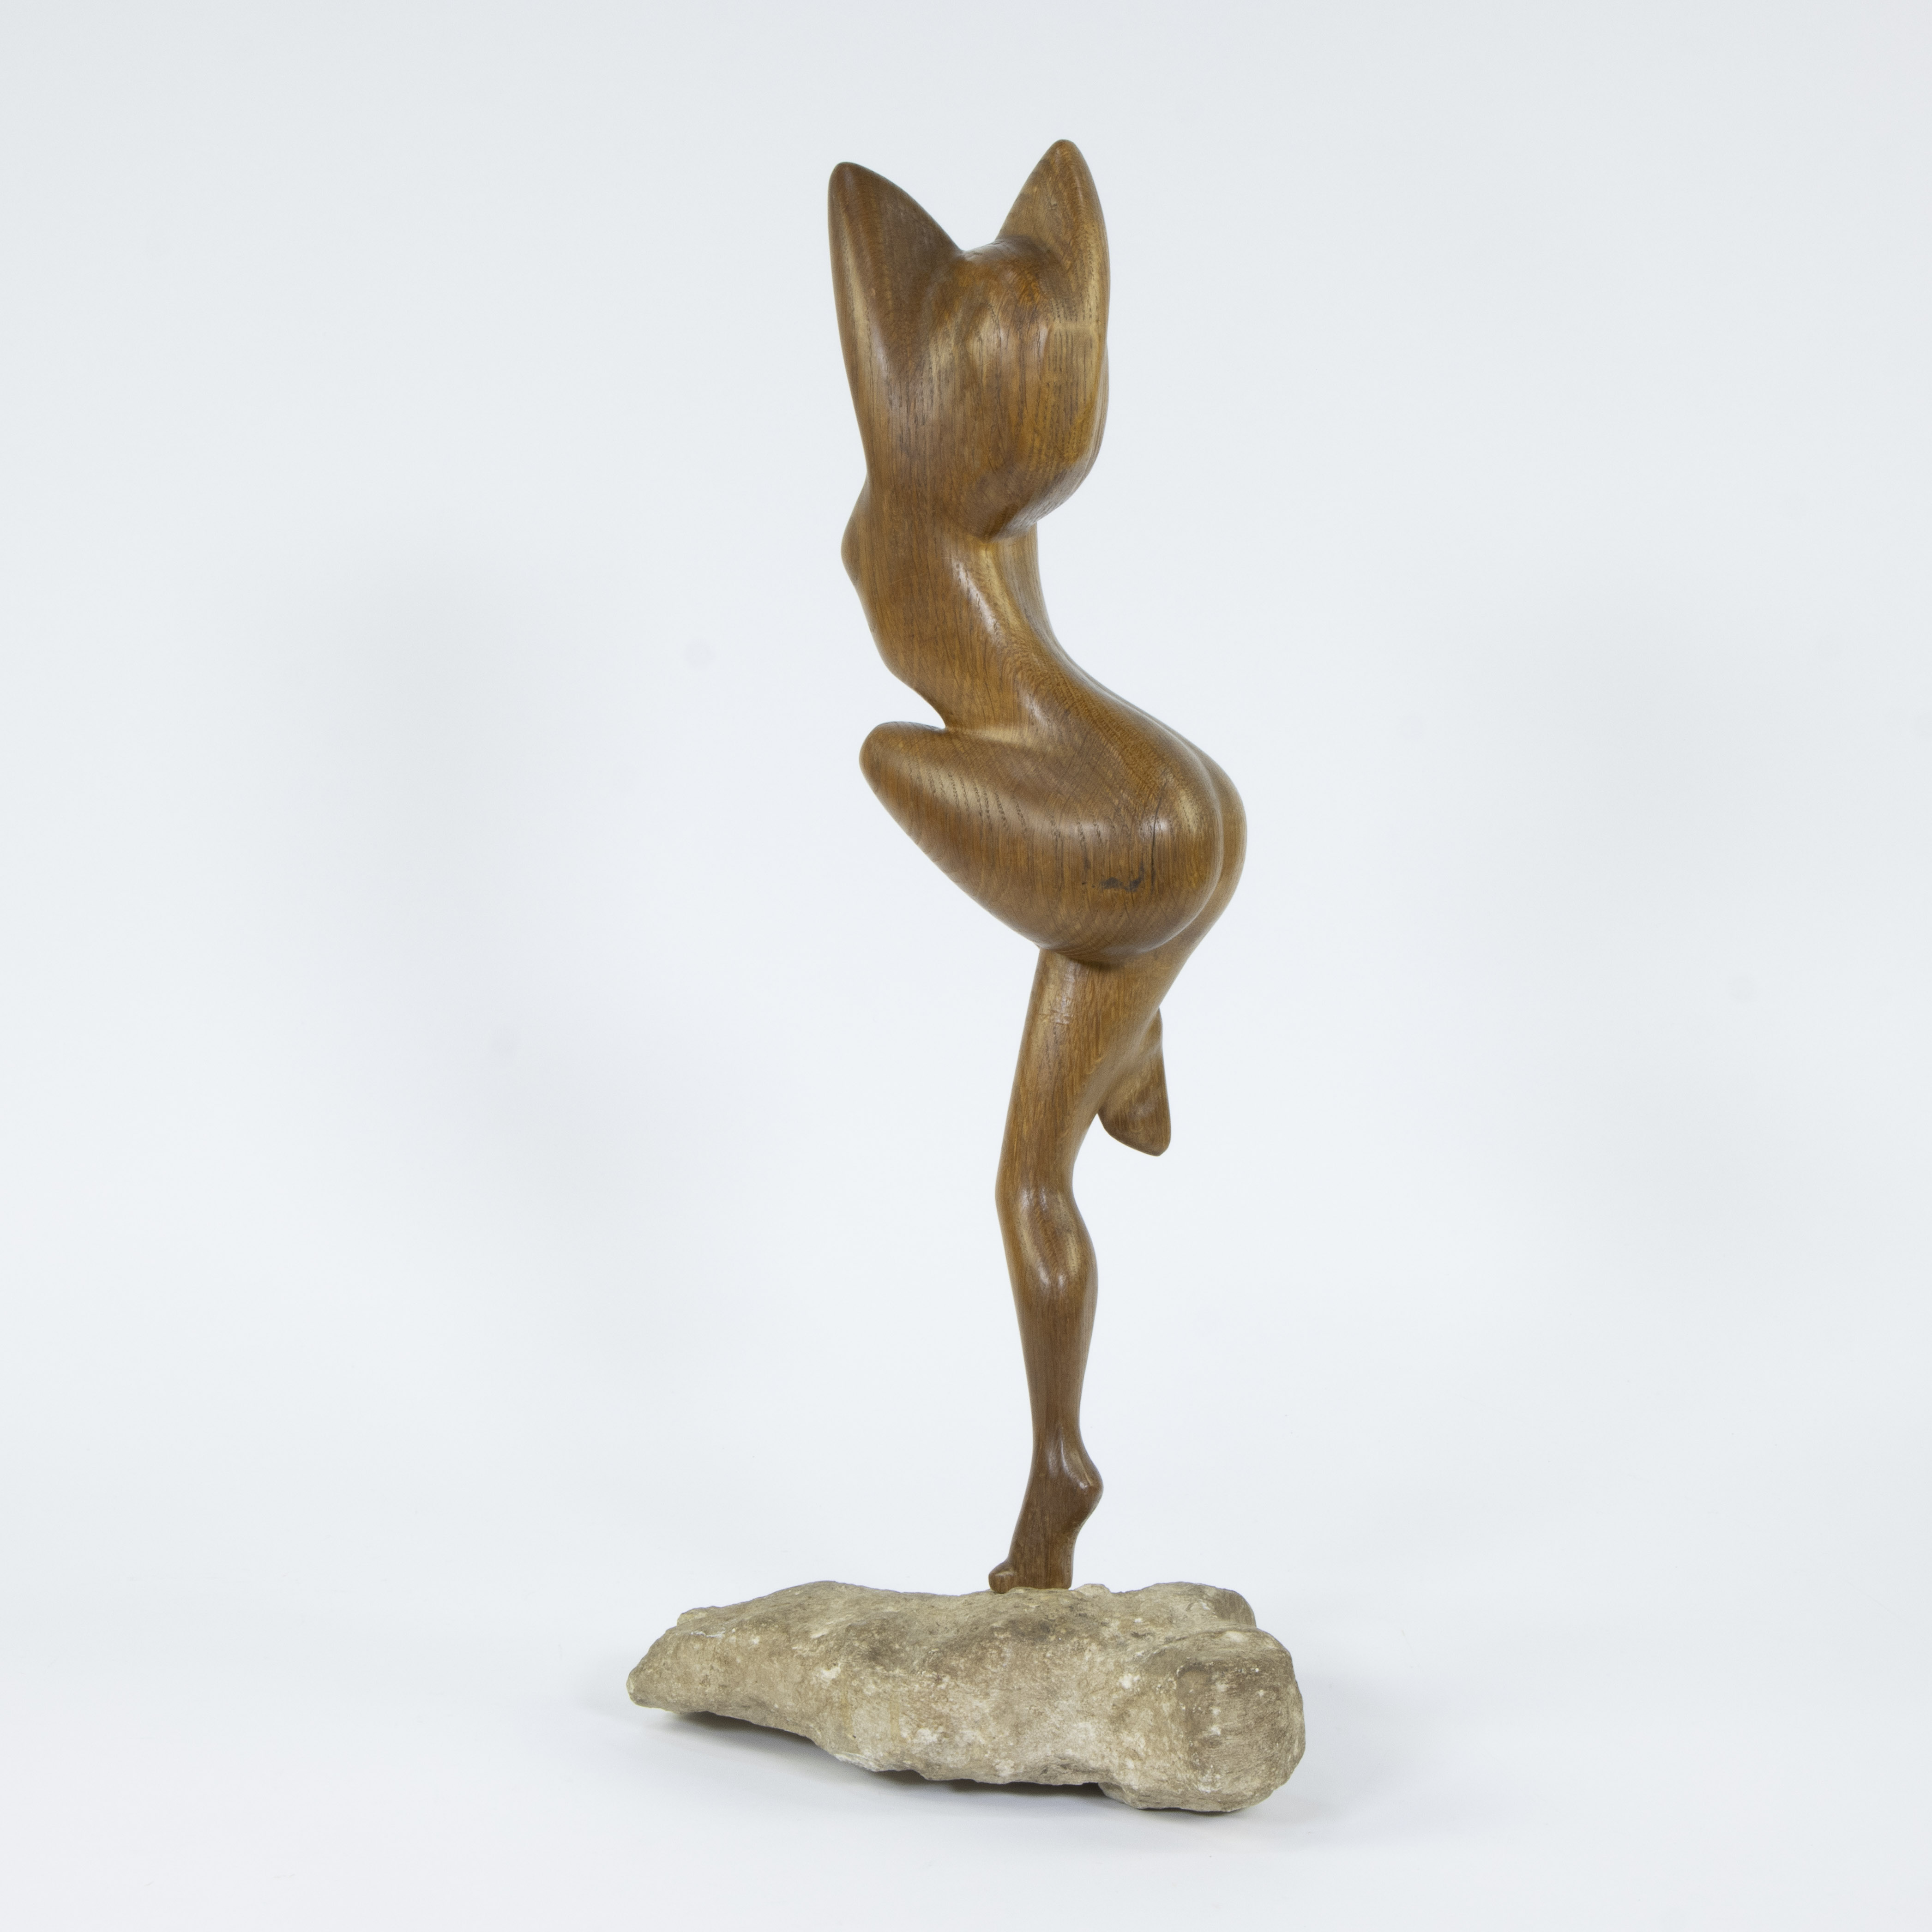 Wooden sculpture of a nude on stone plinth, signed Vermeulen and dated '70 - Image 2 of 5